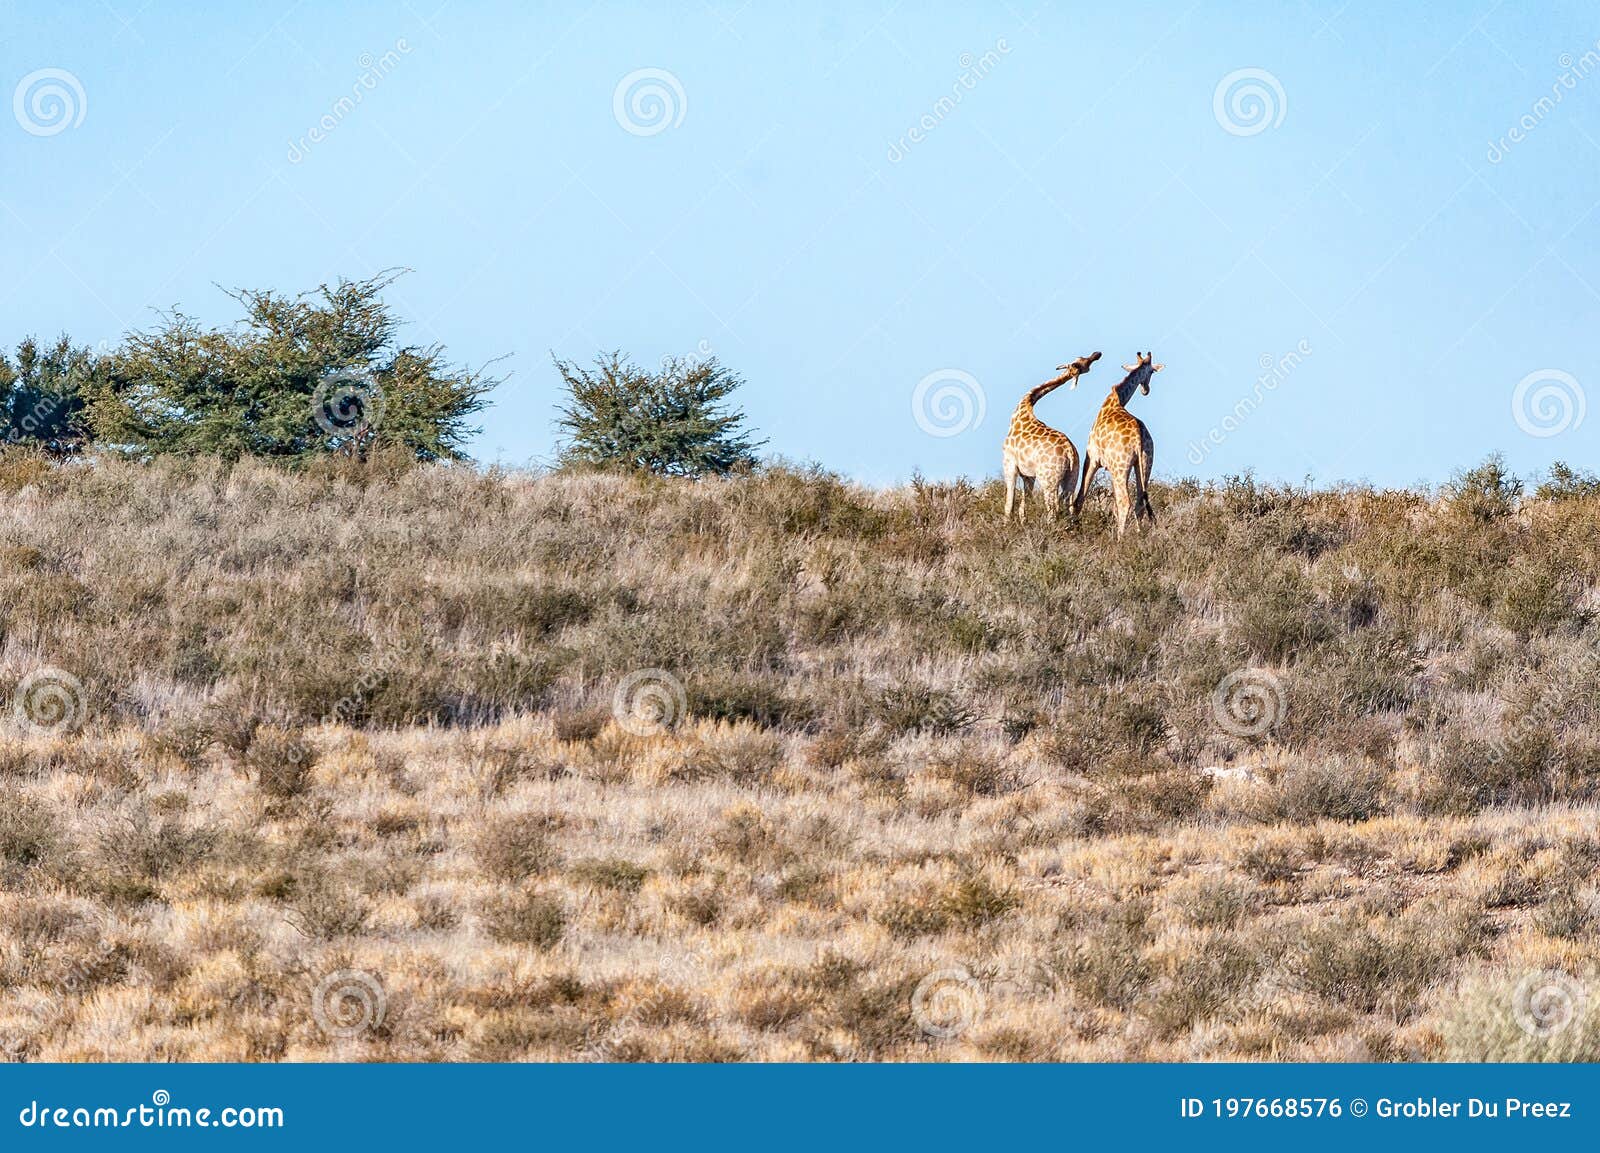 necking south african giraffes in the arid kgalagadi